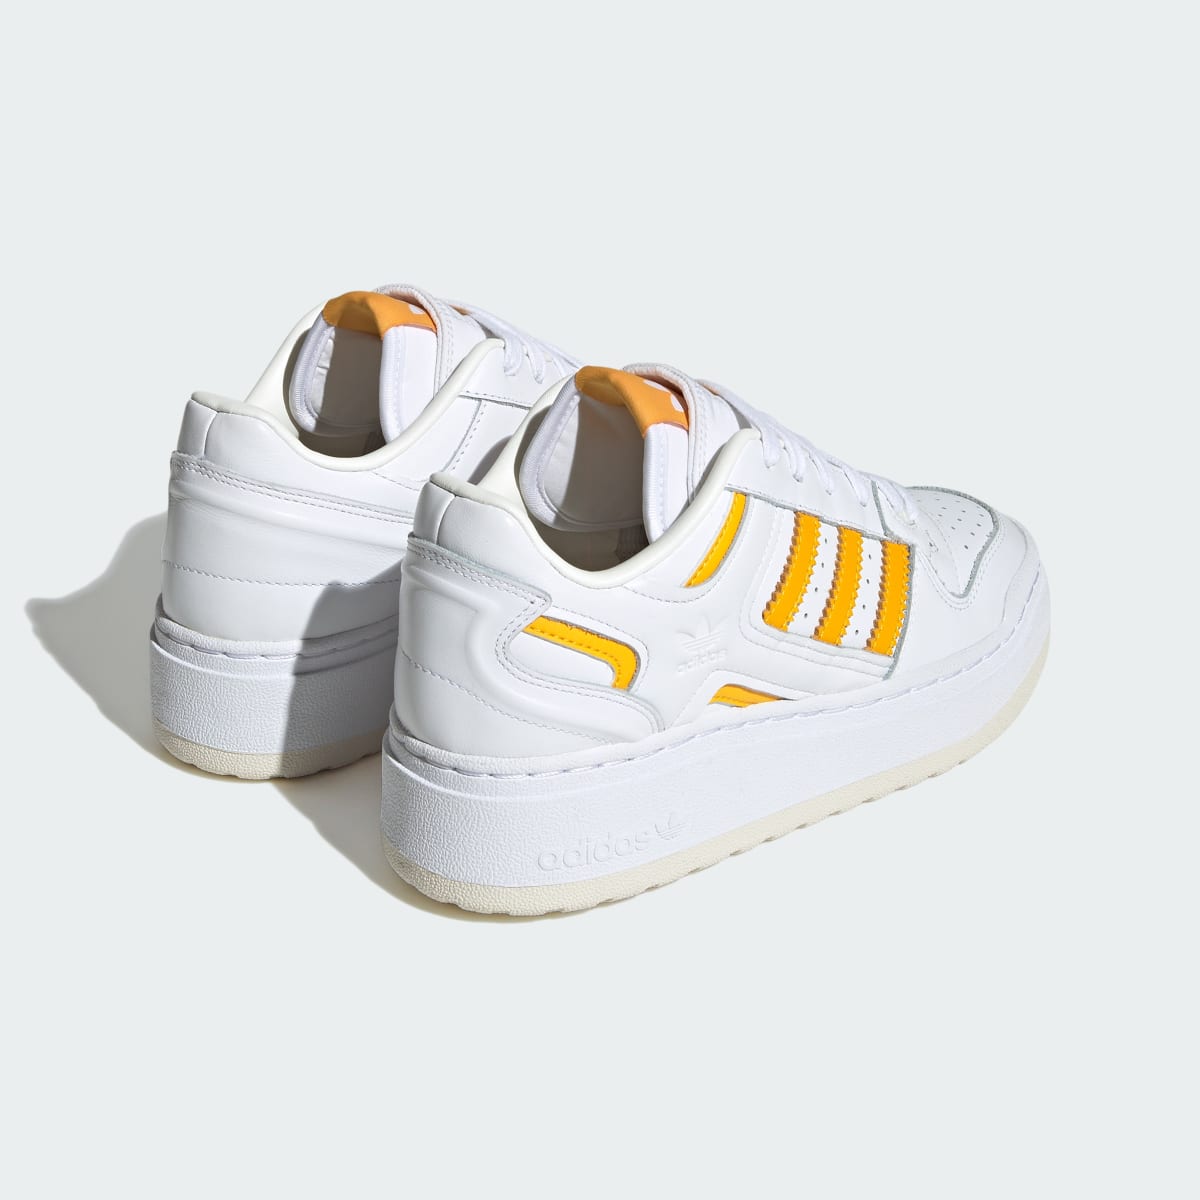 Adidas Forum XLG Shoes. 6